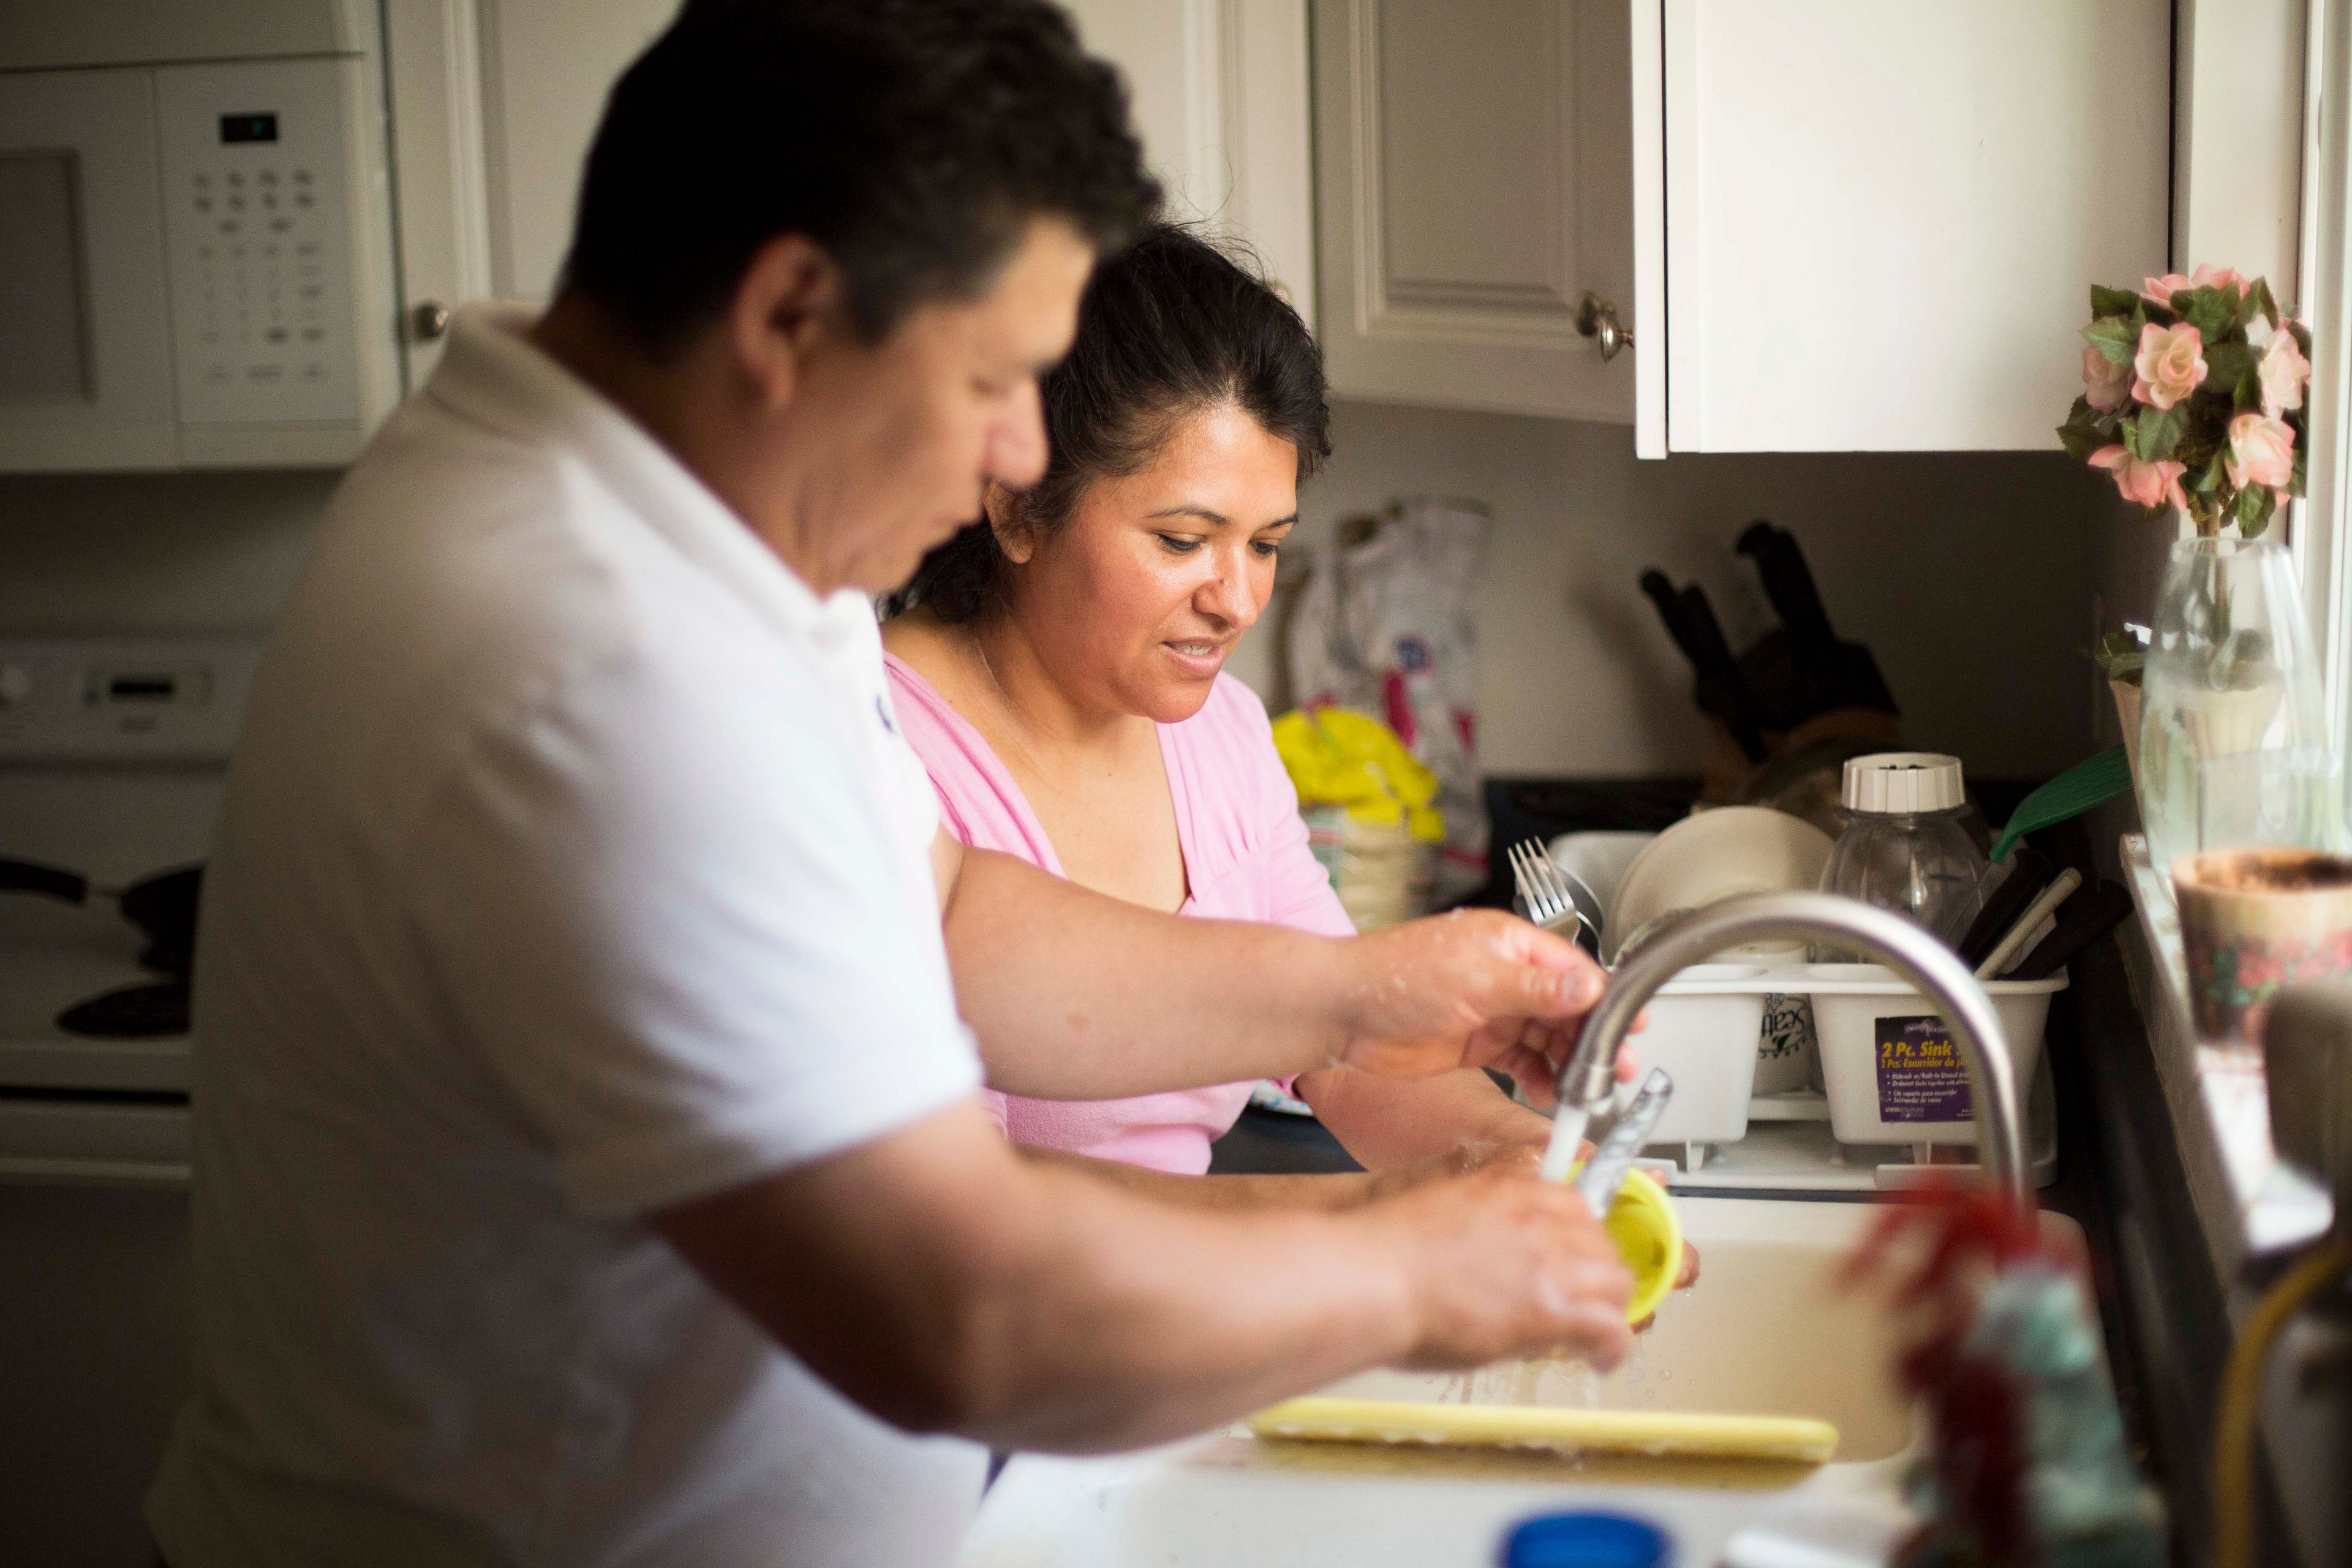 A husband and wife stand by their kitchen sink and wash dishes together.